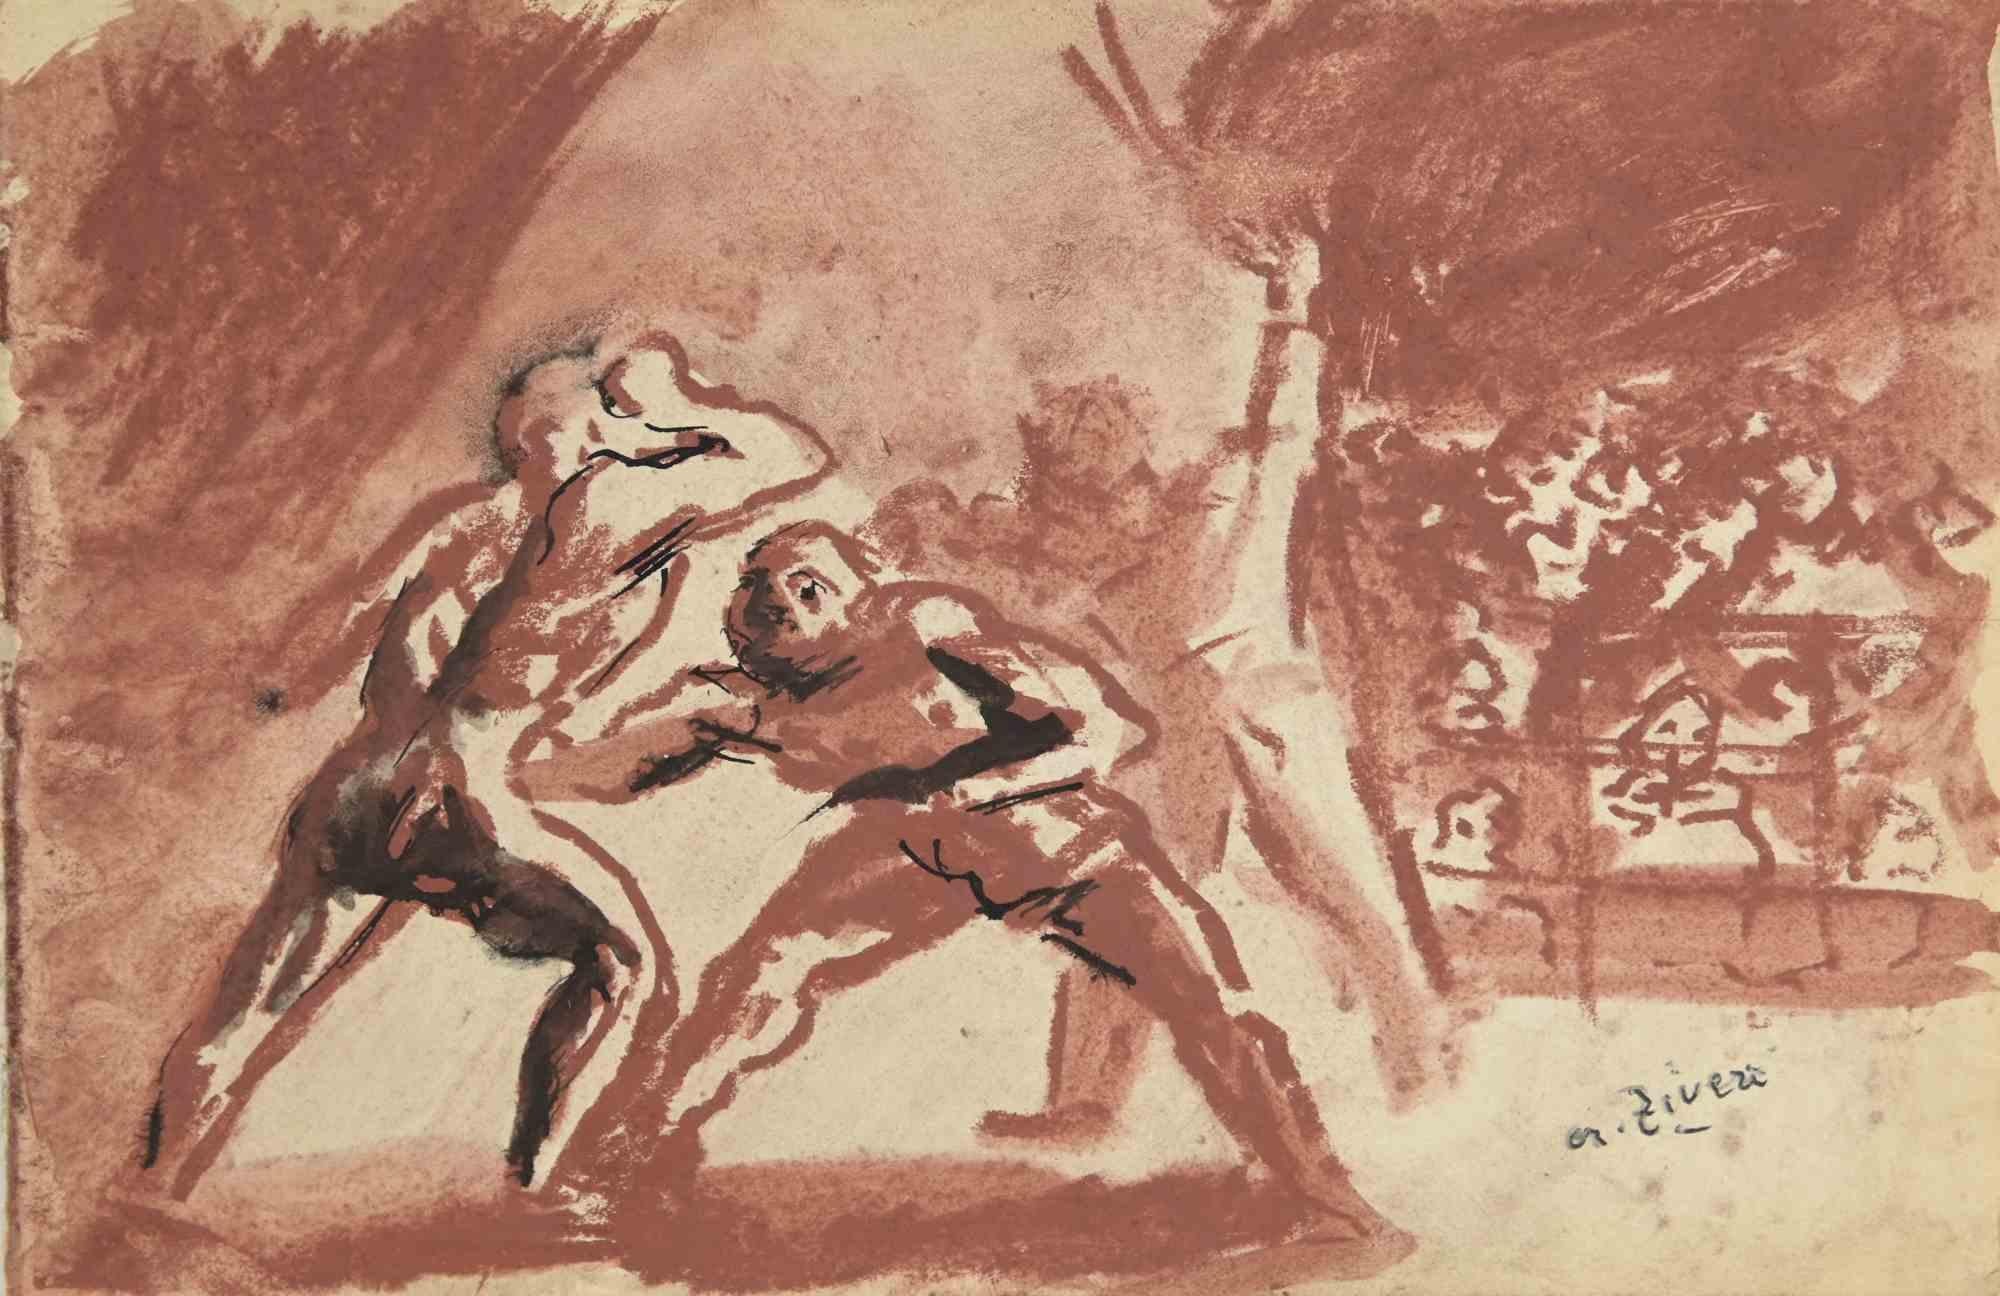 The Wrestling is a drawing realized by Alberto Ziveri in 1930s

Pastel and Watercolor on paper.

Hand-signed.

In good conditions. 

The artwork is represented through deft strokes masterly.

Alberto Ziveri (Rome,1908 – 1990), the Italian painter of